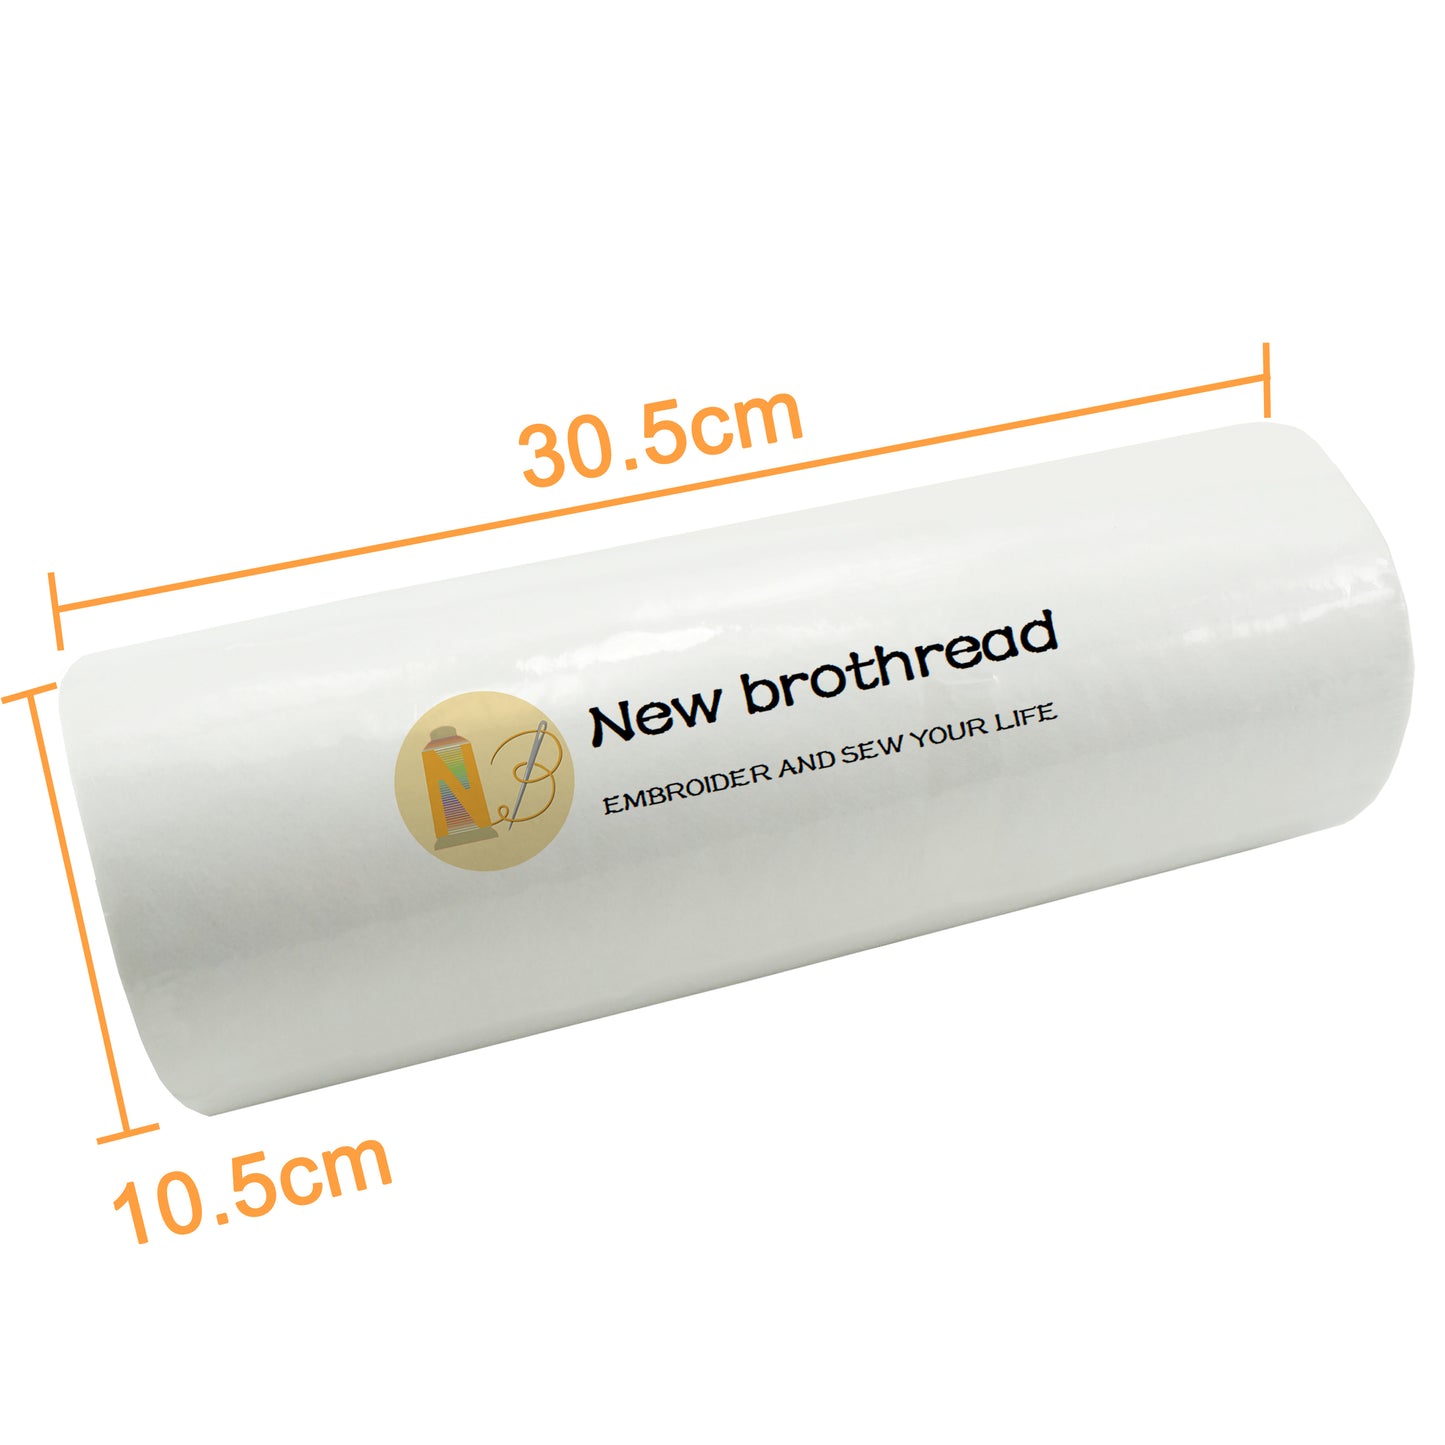 New brothread 63 Brother Colors Polyester Embroidery Machine Thread with  Bonus of 10x10yd Medium Weight Tearaway Embroidery Stabilizer